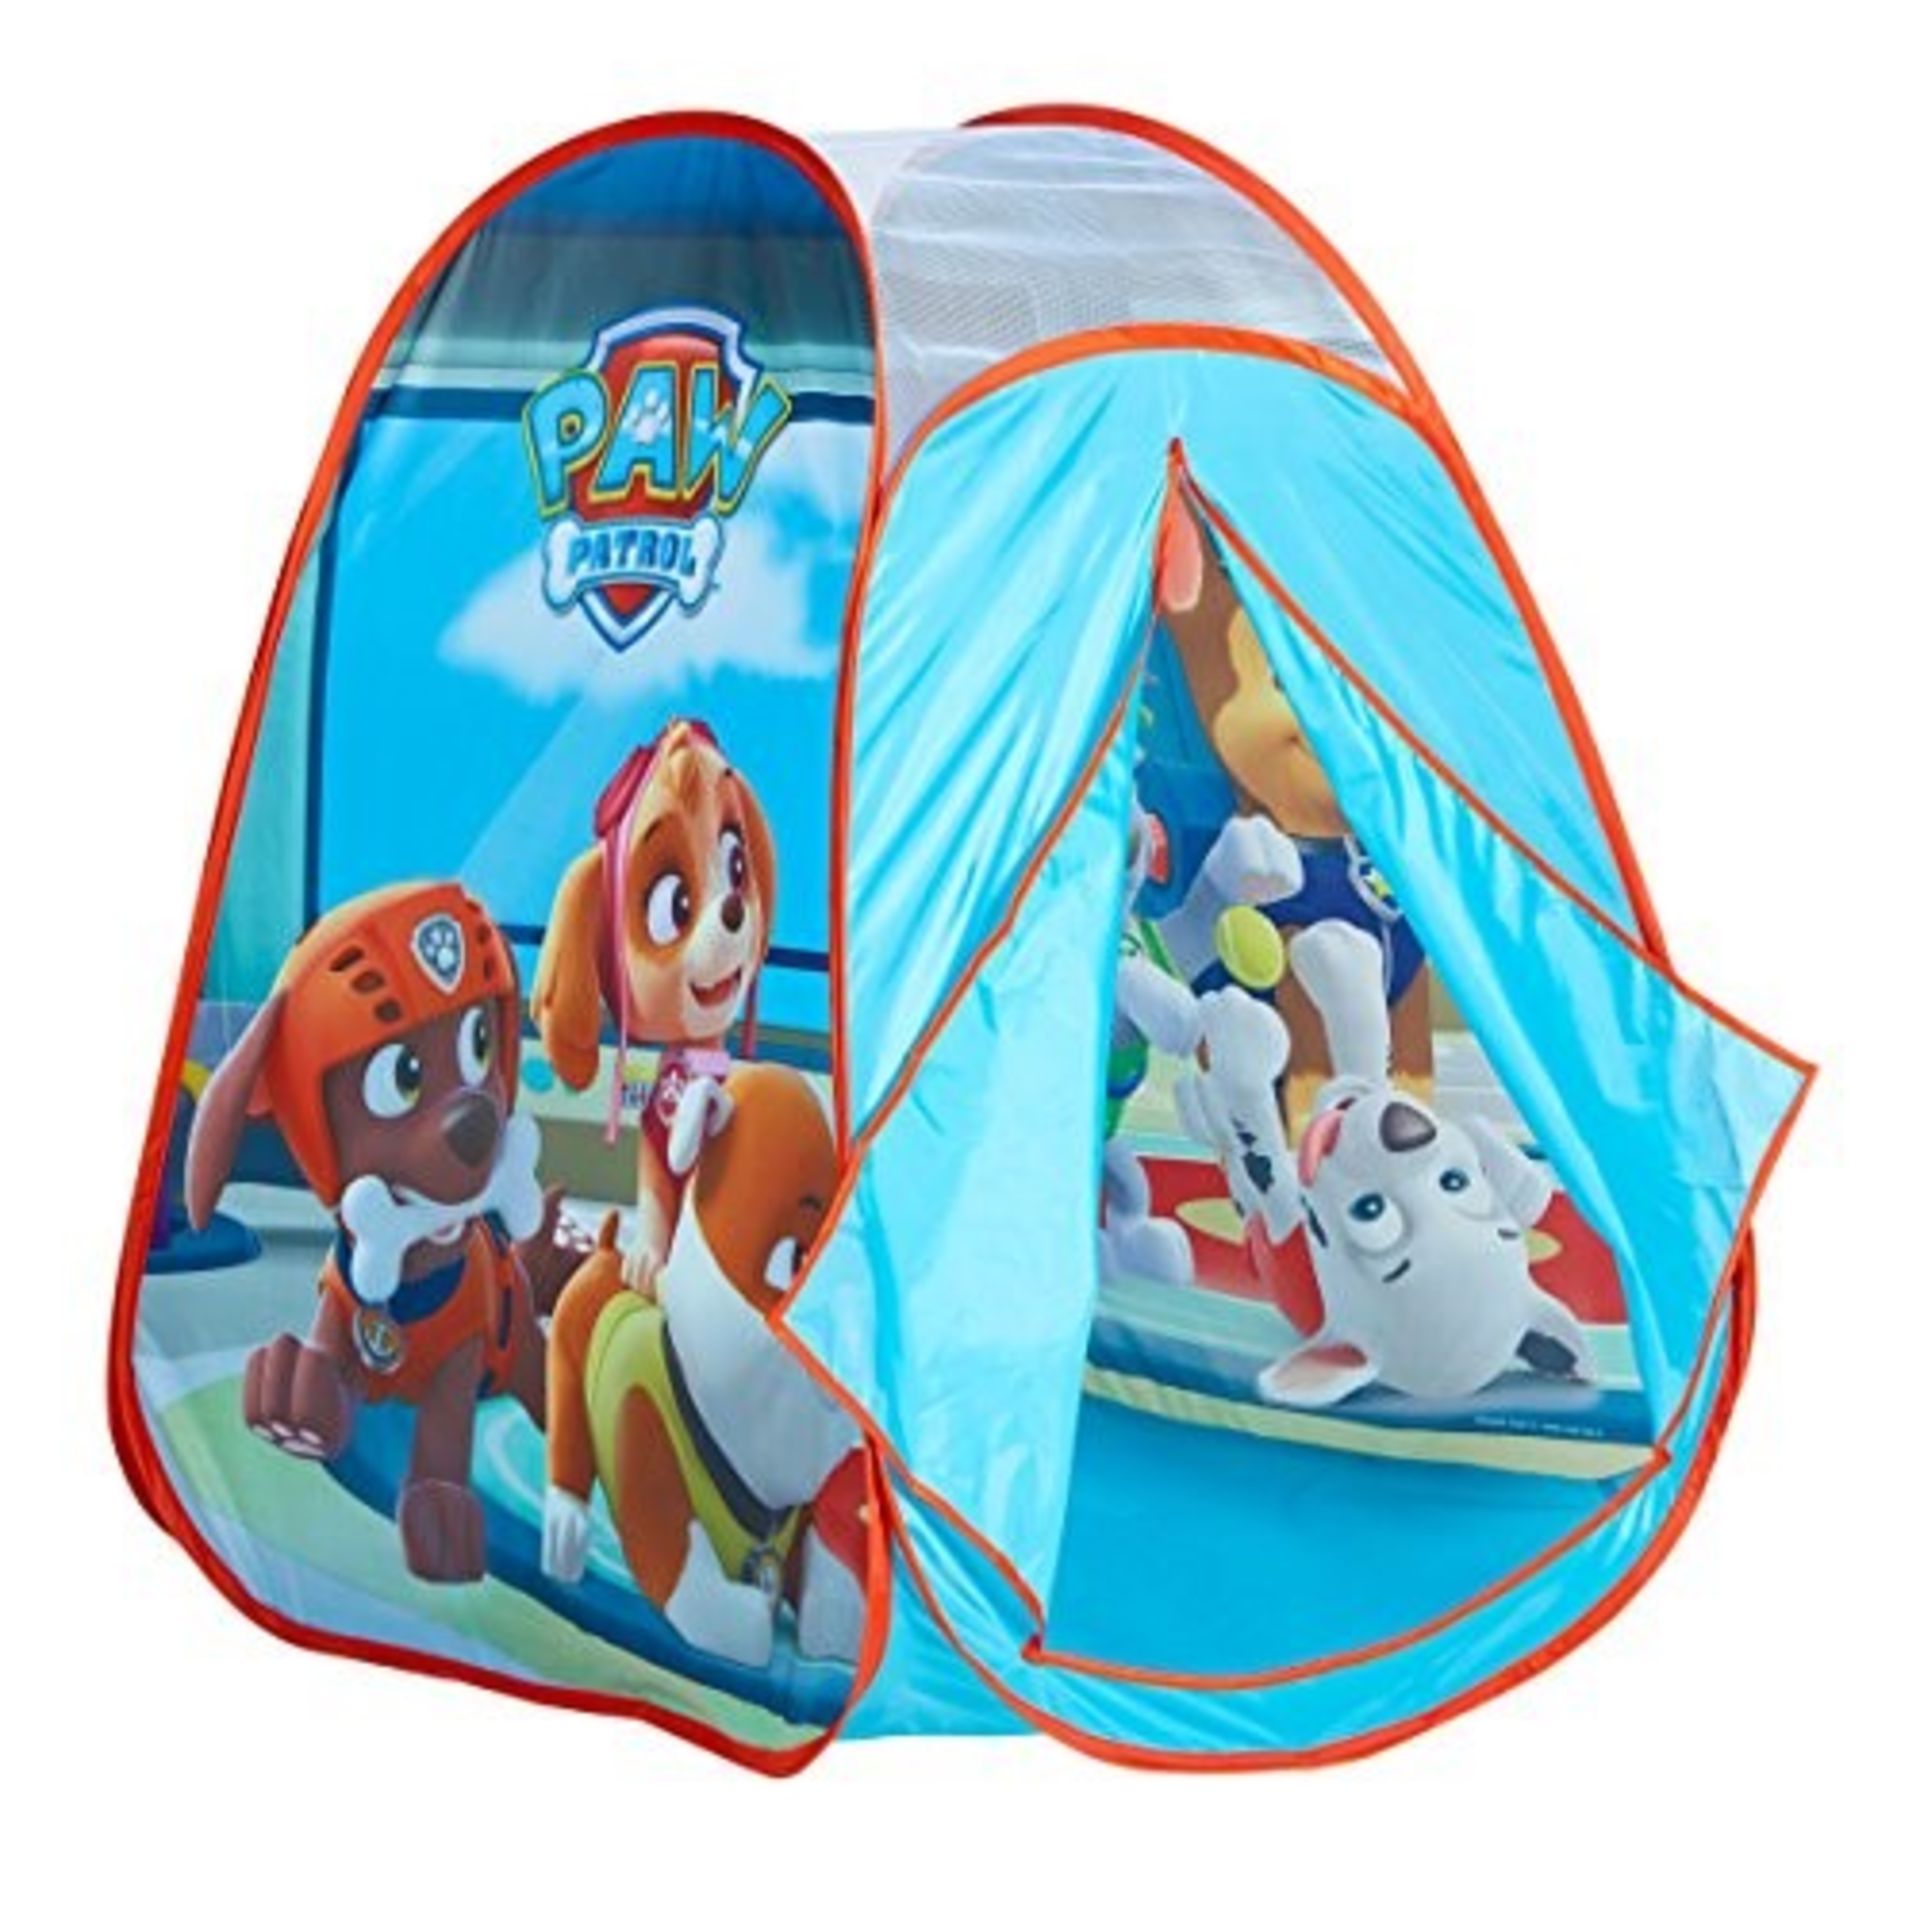 Paw Patrol KidActive Pop Up Playhouse Play Tent Indoor or Outdoor Portable Play - Ever